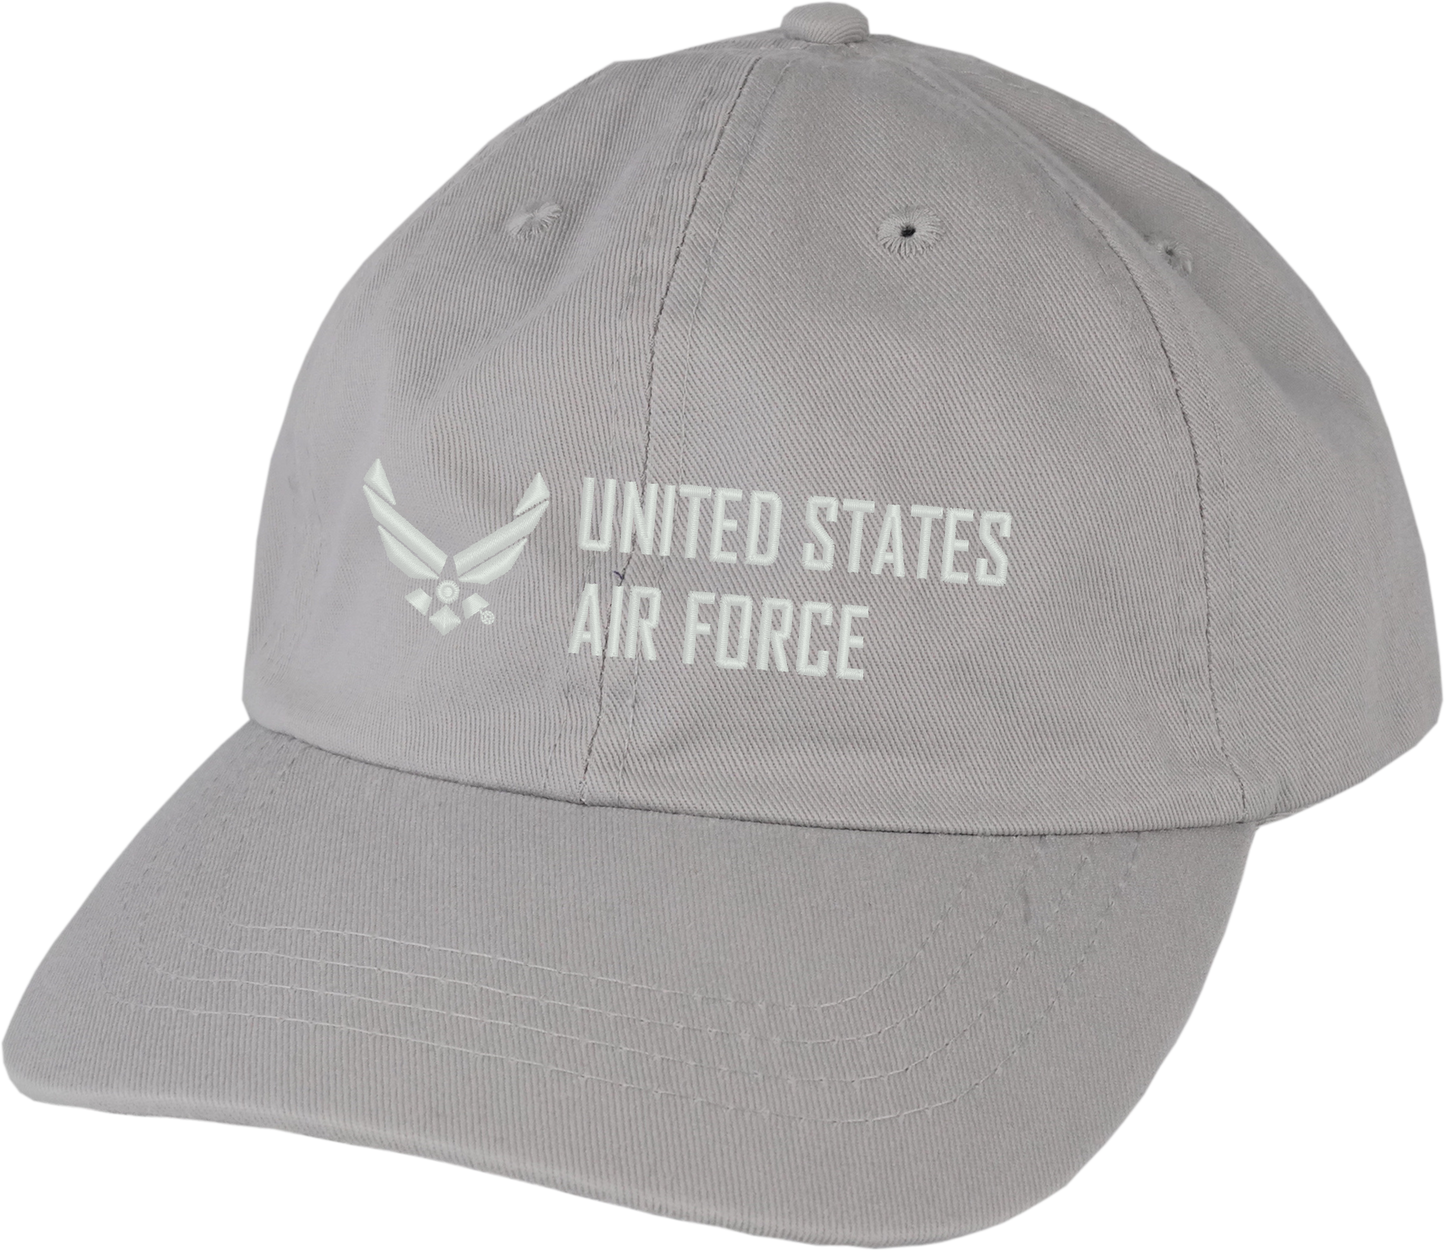 U.S. Air Force with Symbol on Grey Unstructured Ball Cap